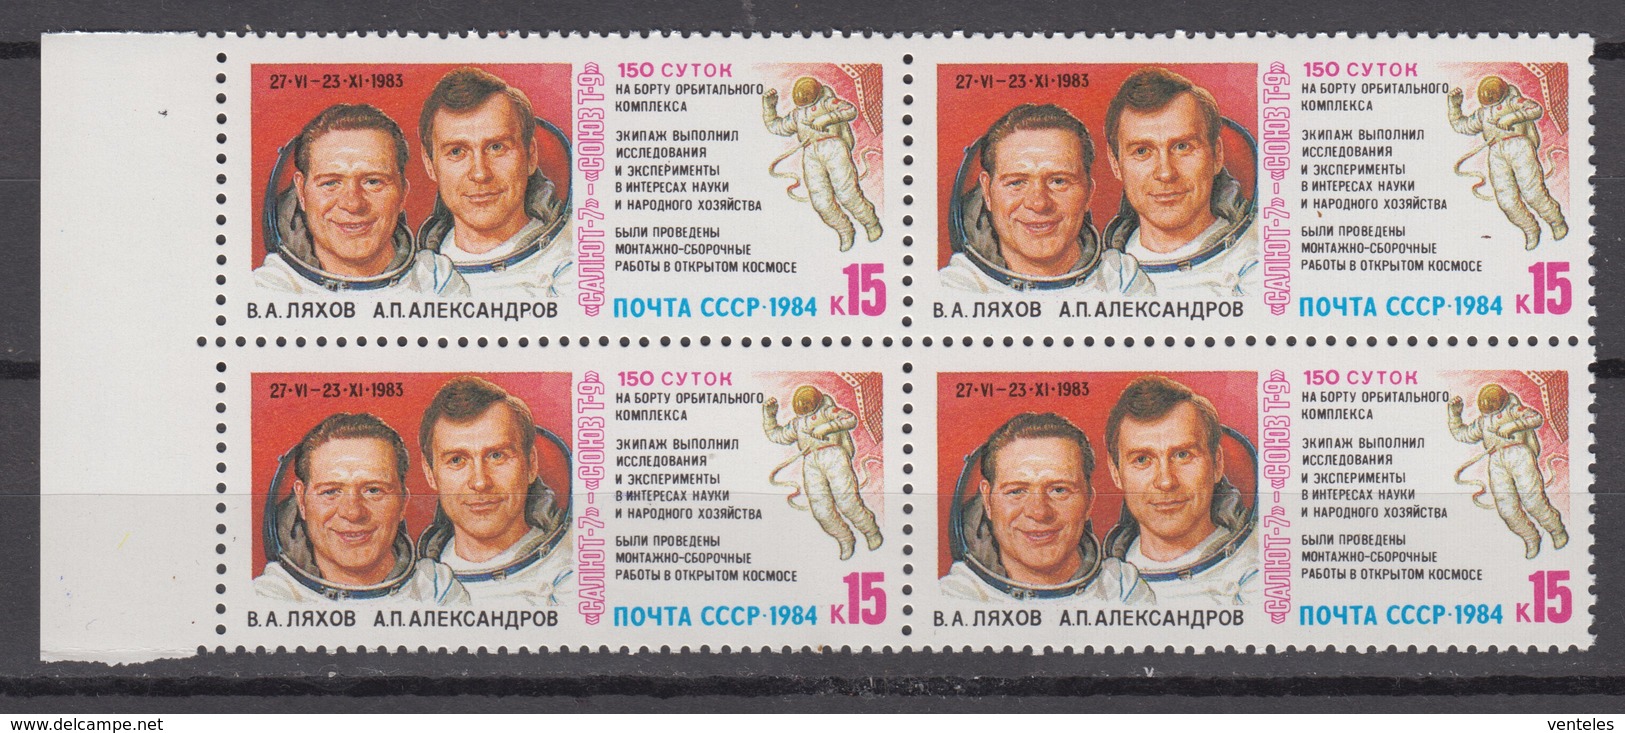 Russia, USSR 27.06.1984 Mi # 5401 In Block Of 4,  Salyut 7 - Soyuz T-9 Space Station, 150 Days Int The Outer Space, MNH - Unused Stamps